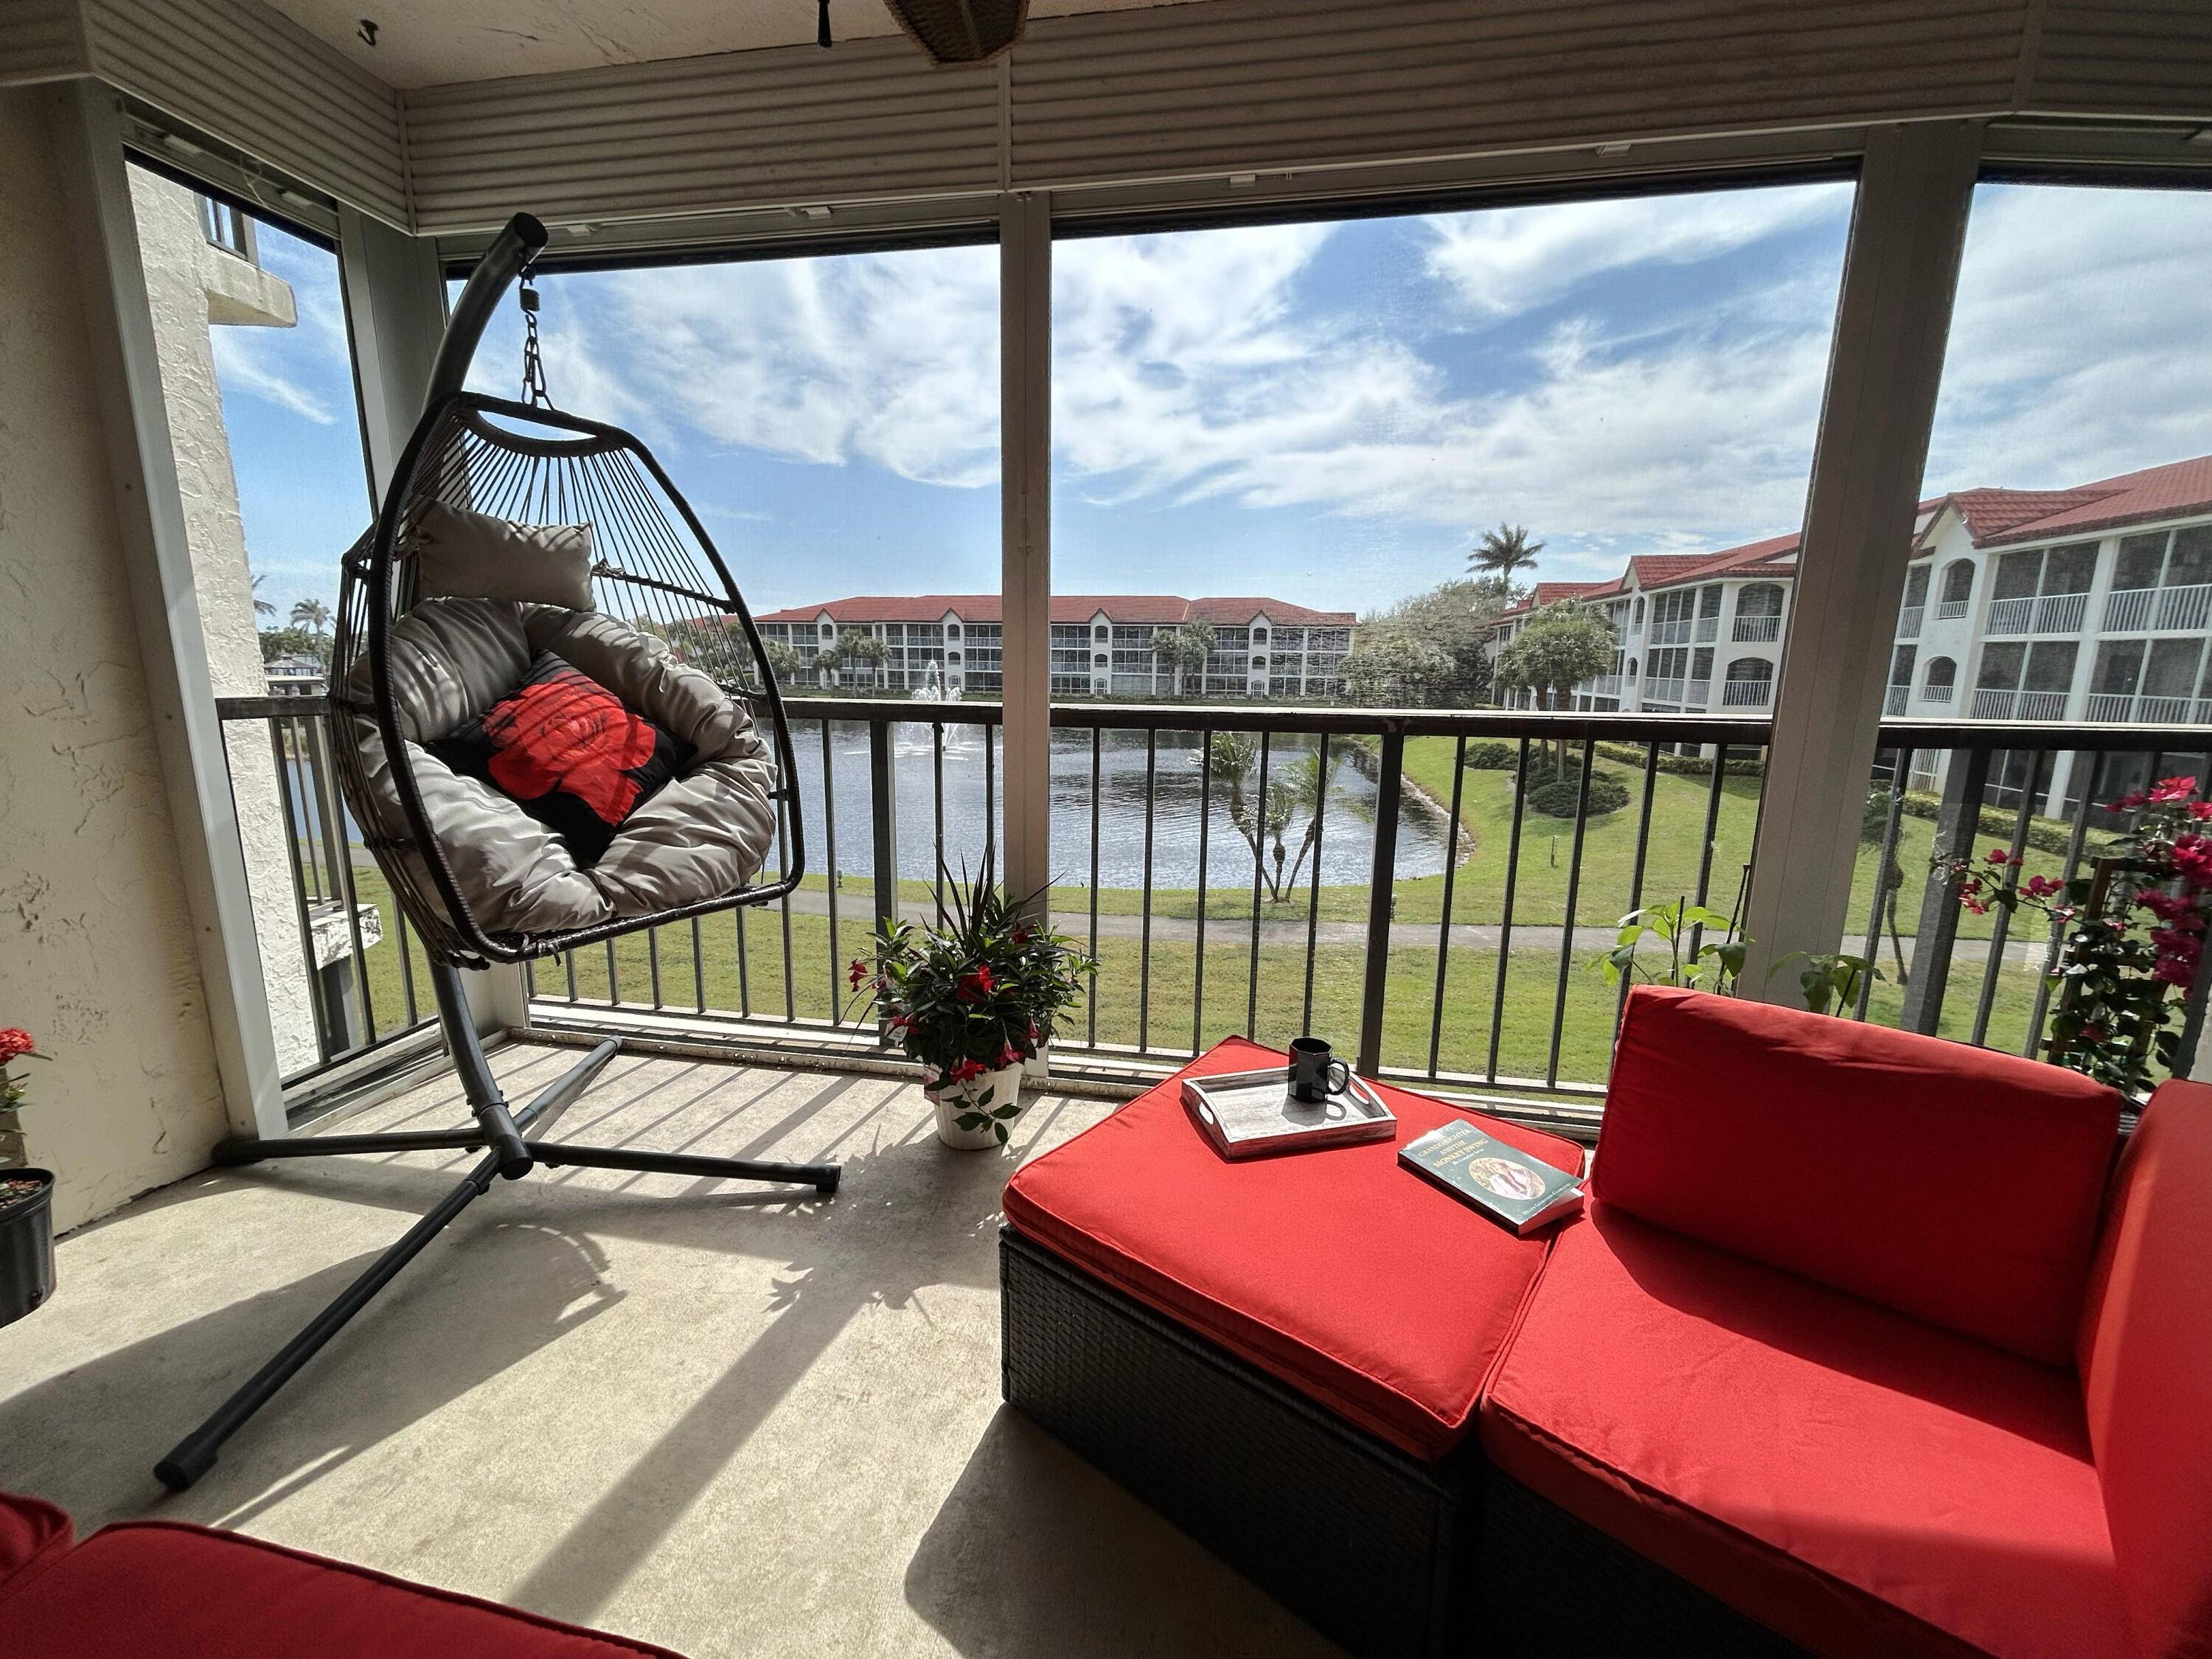 Resort style living ! Featuring breathtaking views of the community lake with a fountain, the pool clubhouse area and bonus view of the intracoastal waterway from the balcony.